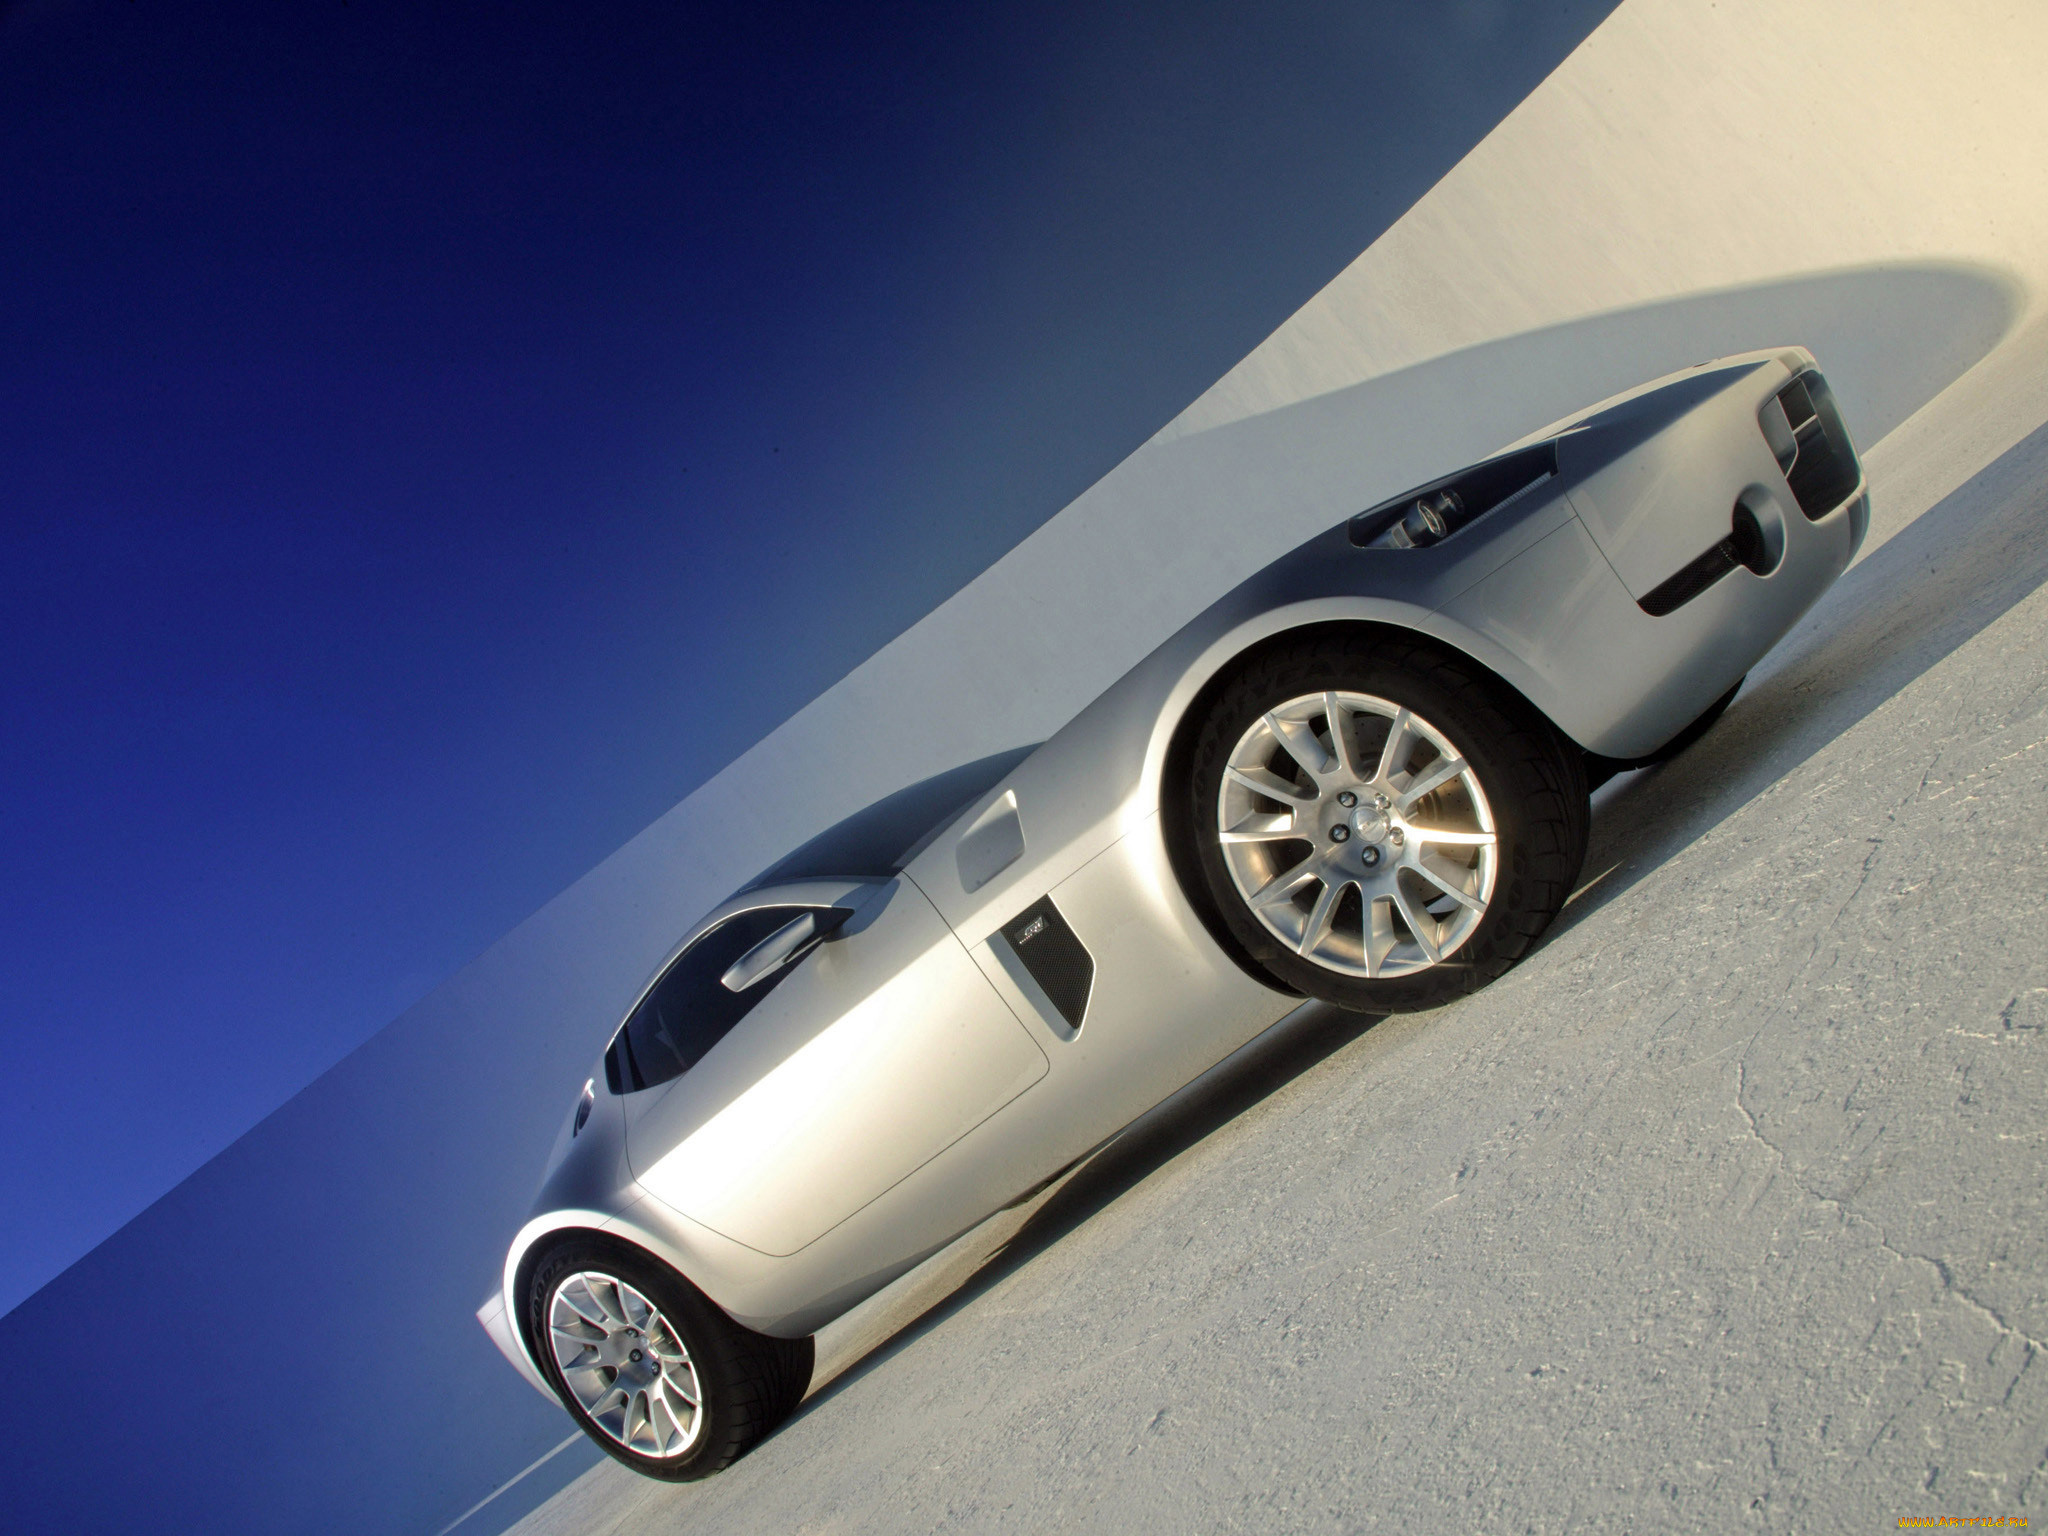 shelby ford gr-1 concept 2005, , ac cobra, shelby, gr-1, ford, concept, 2005